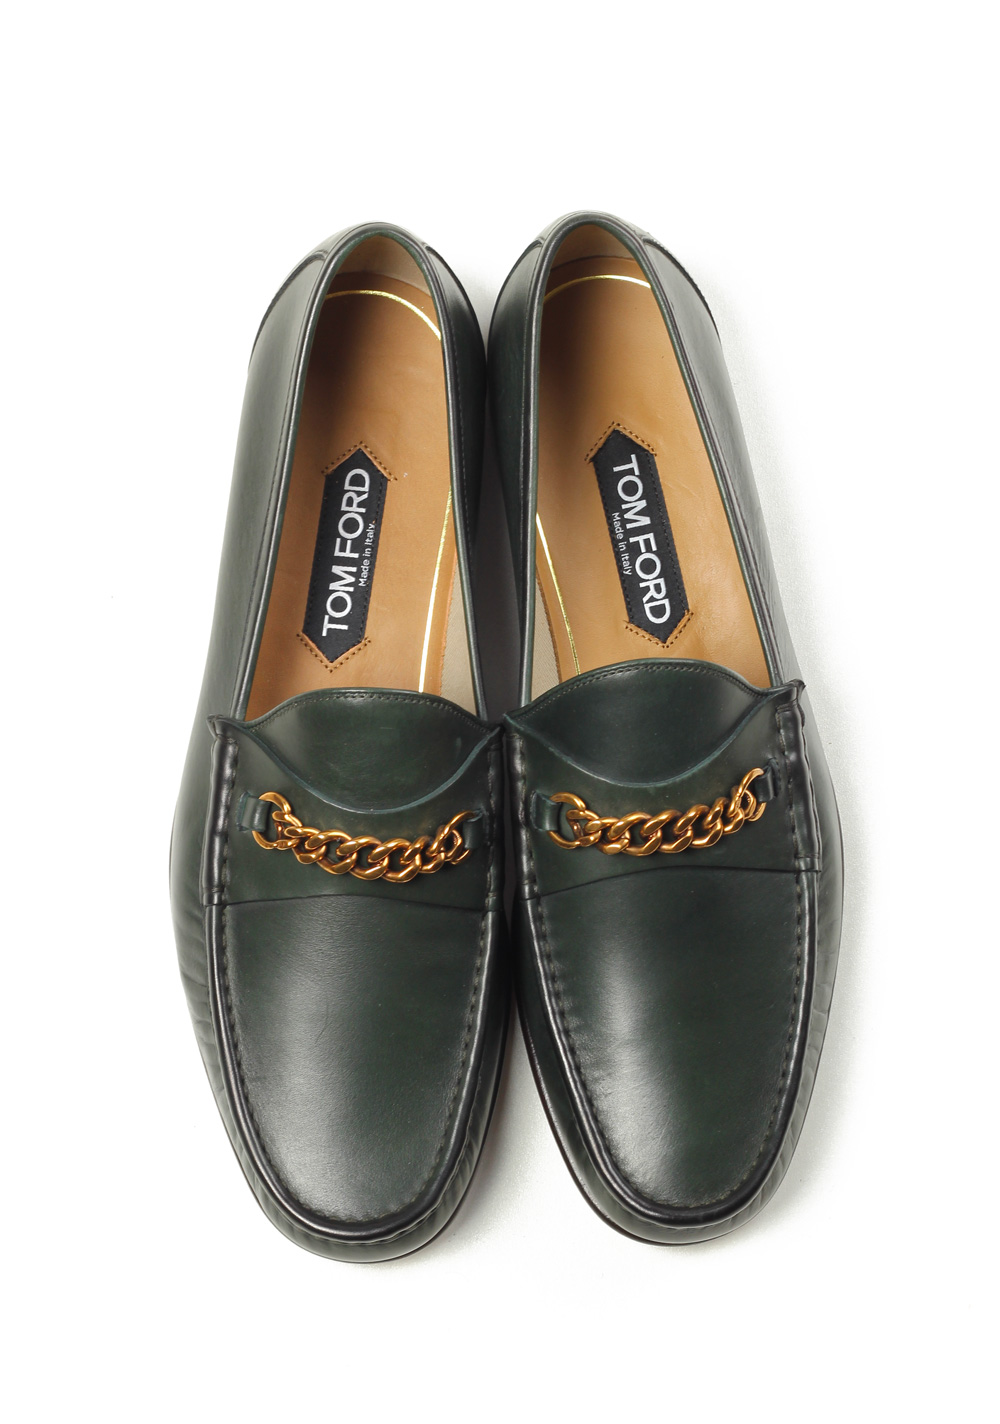 TOM FORD York Green Leather Chain Loafers Shoes Size 8 UK / 9 U.S. | Costume Limité